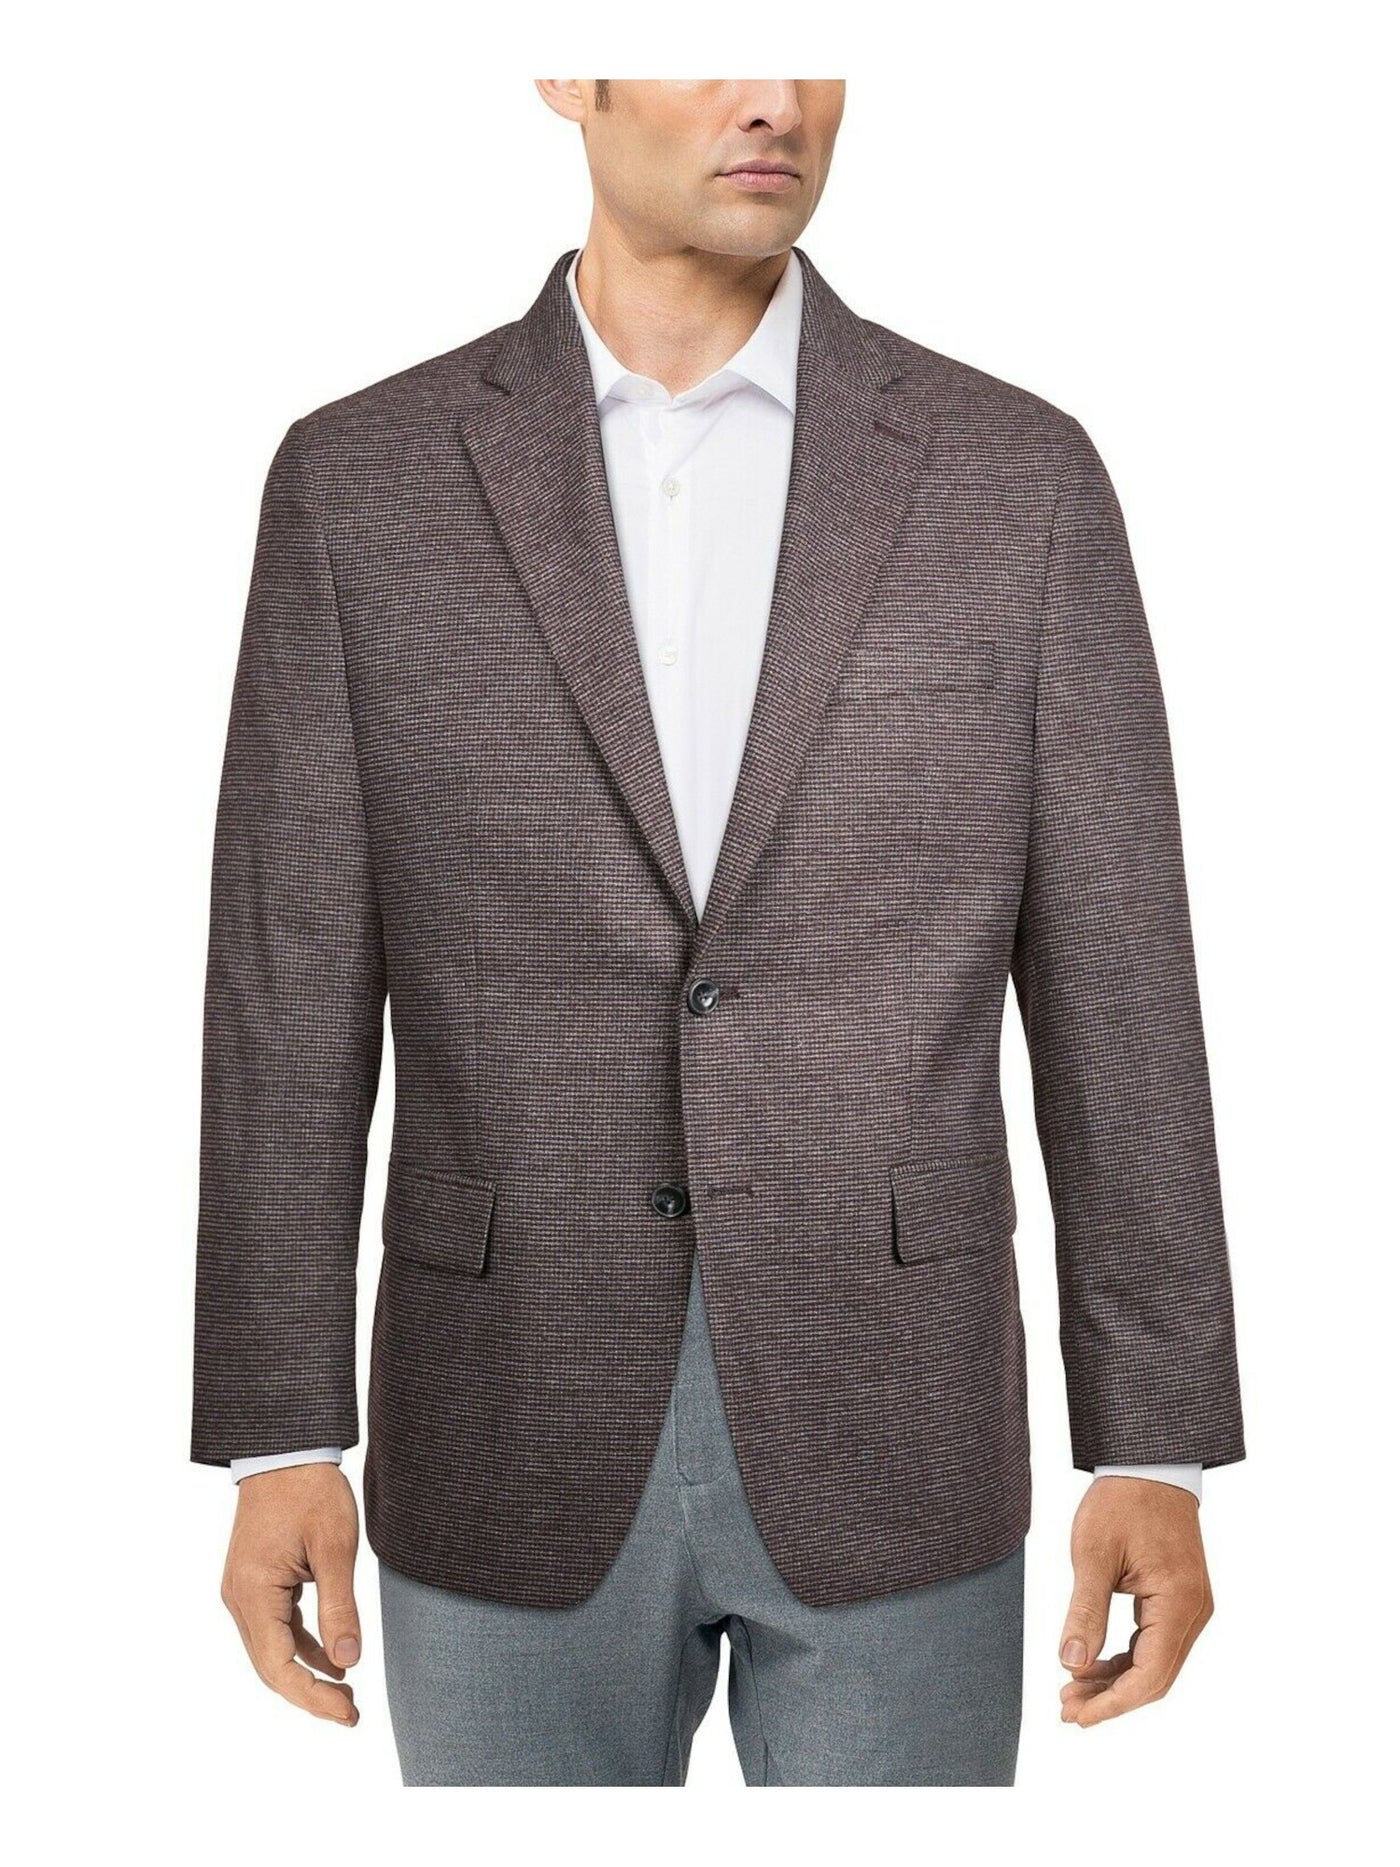 MICHAEL KORS Mens Brown Single Breasted, Check Classic Fit Blazer Sport Coat 38R